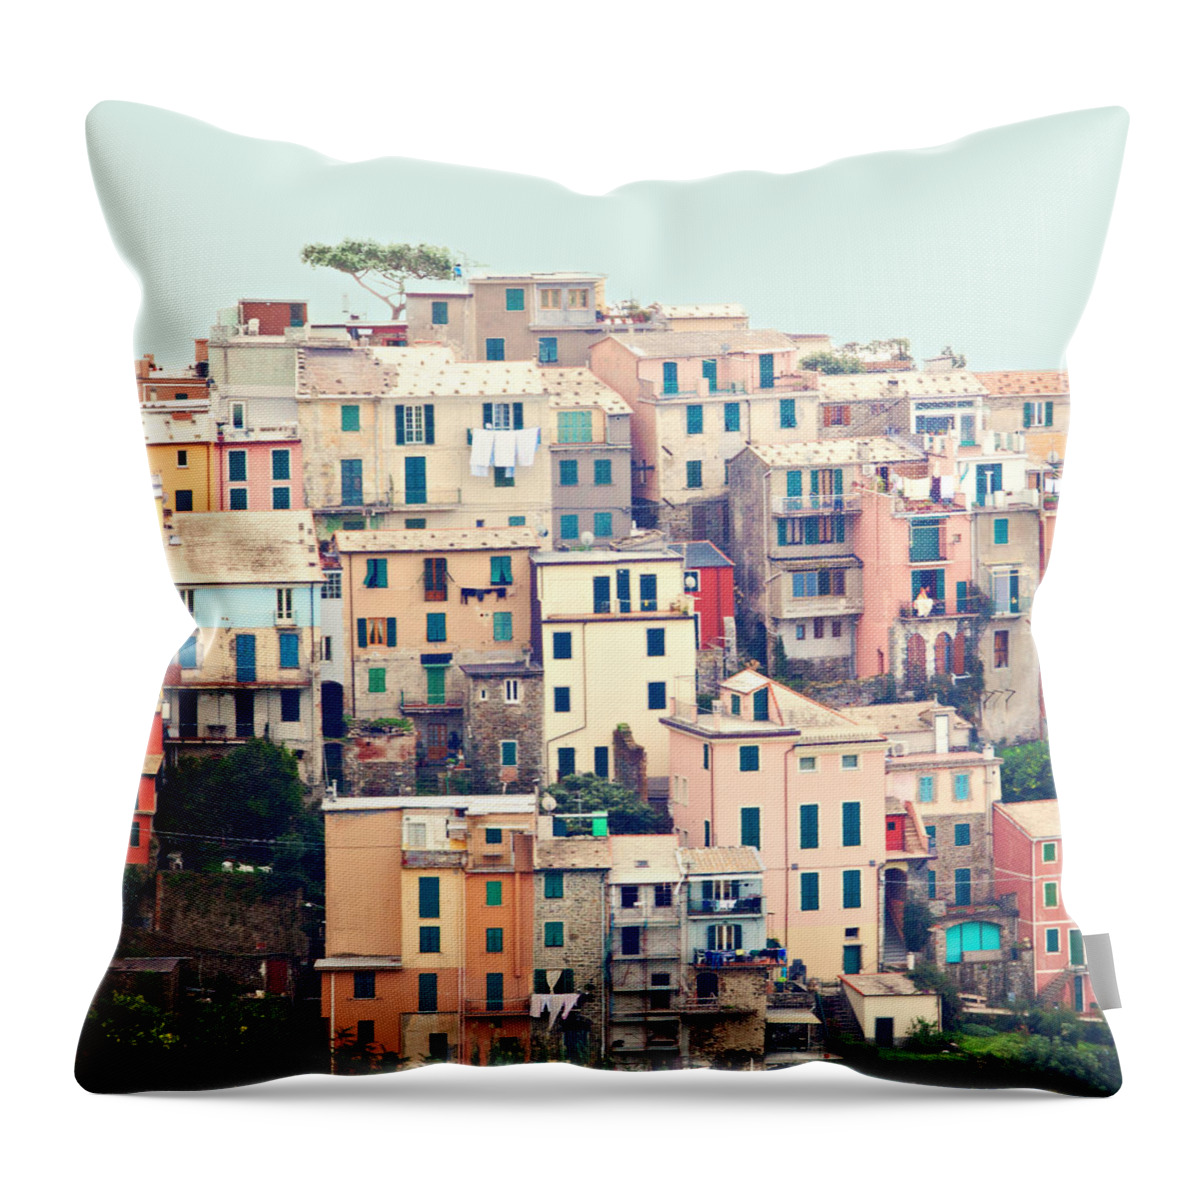 Cinque Terre Throw Pillow featuring the photograph Cinque Terre Italy #2 by Kim Fearheiley